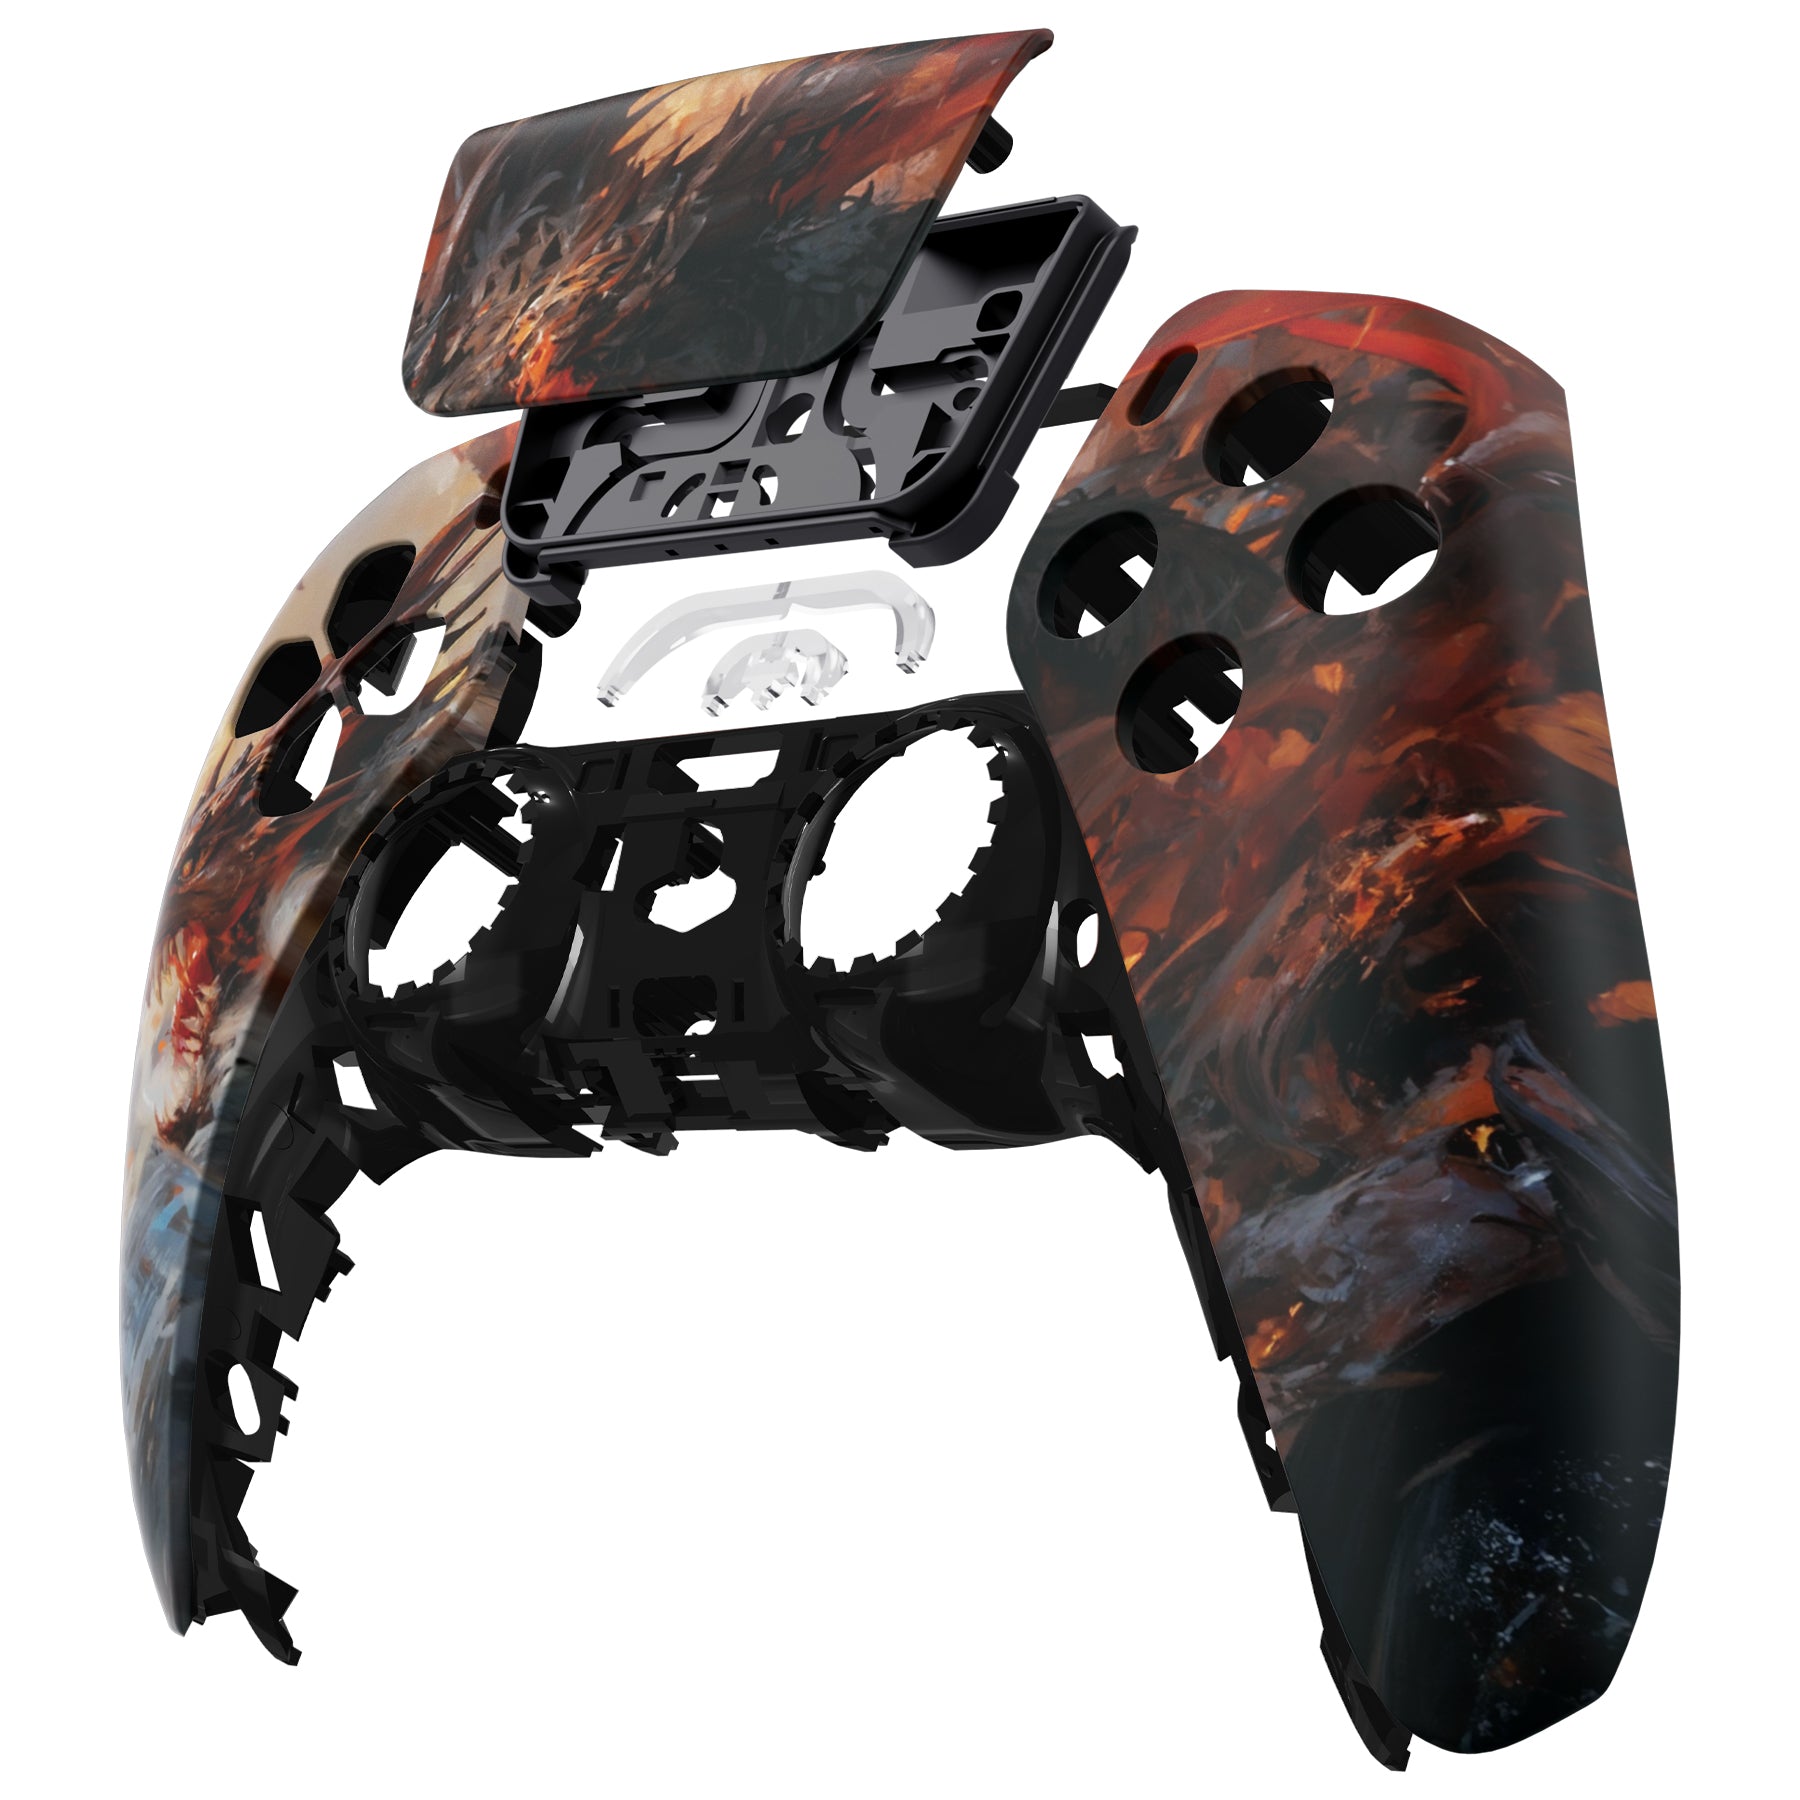 eXtremeRate Replacemen Front Housing Shell with Touchpad Compatible with PS5 Controller BDM-010 BDM-020 BDM-030 - eXtremeRate